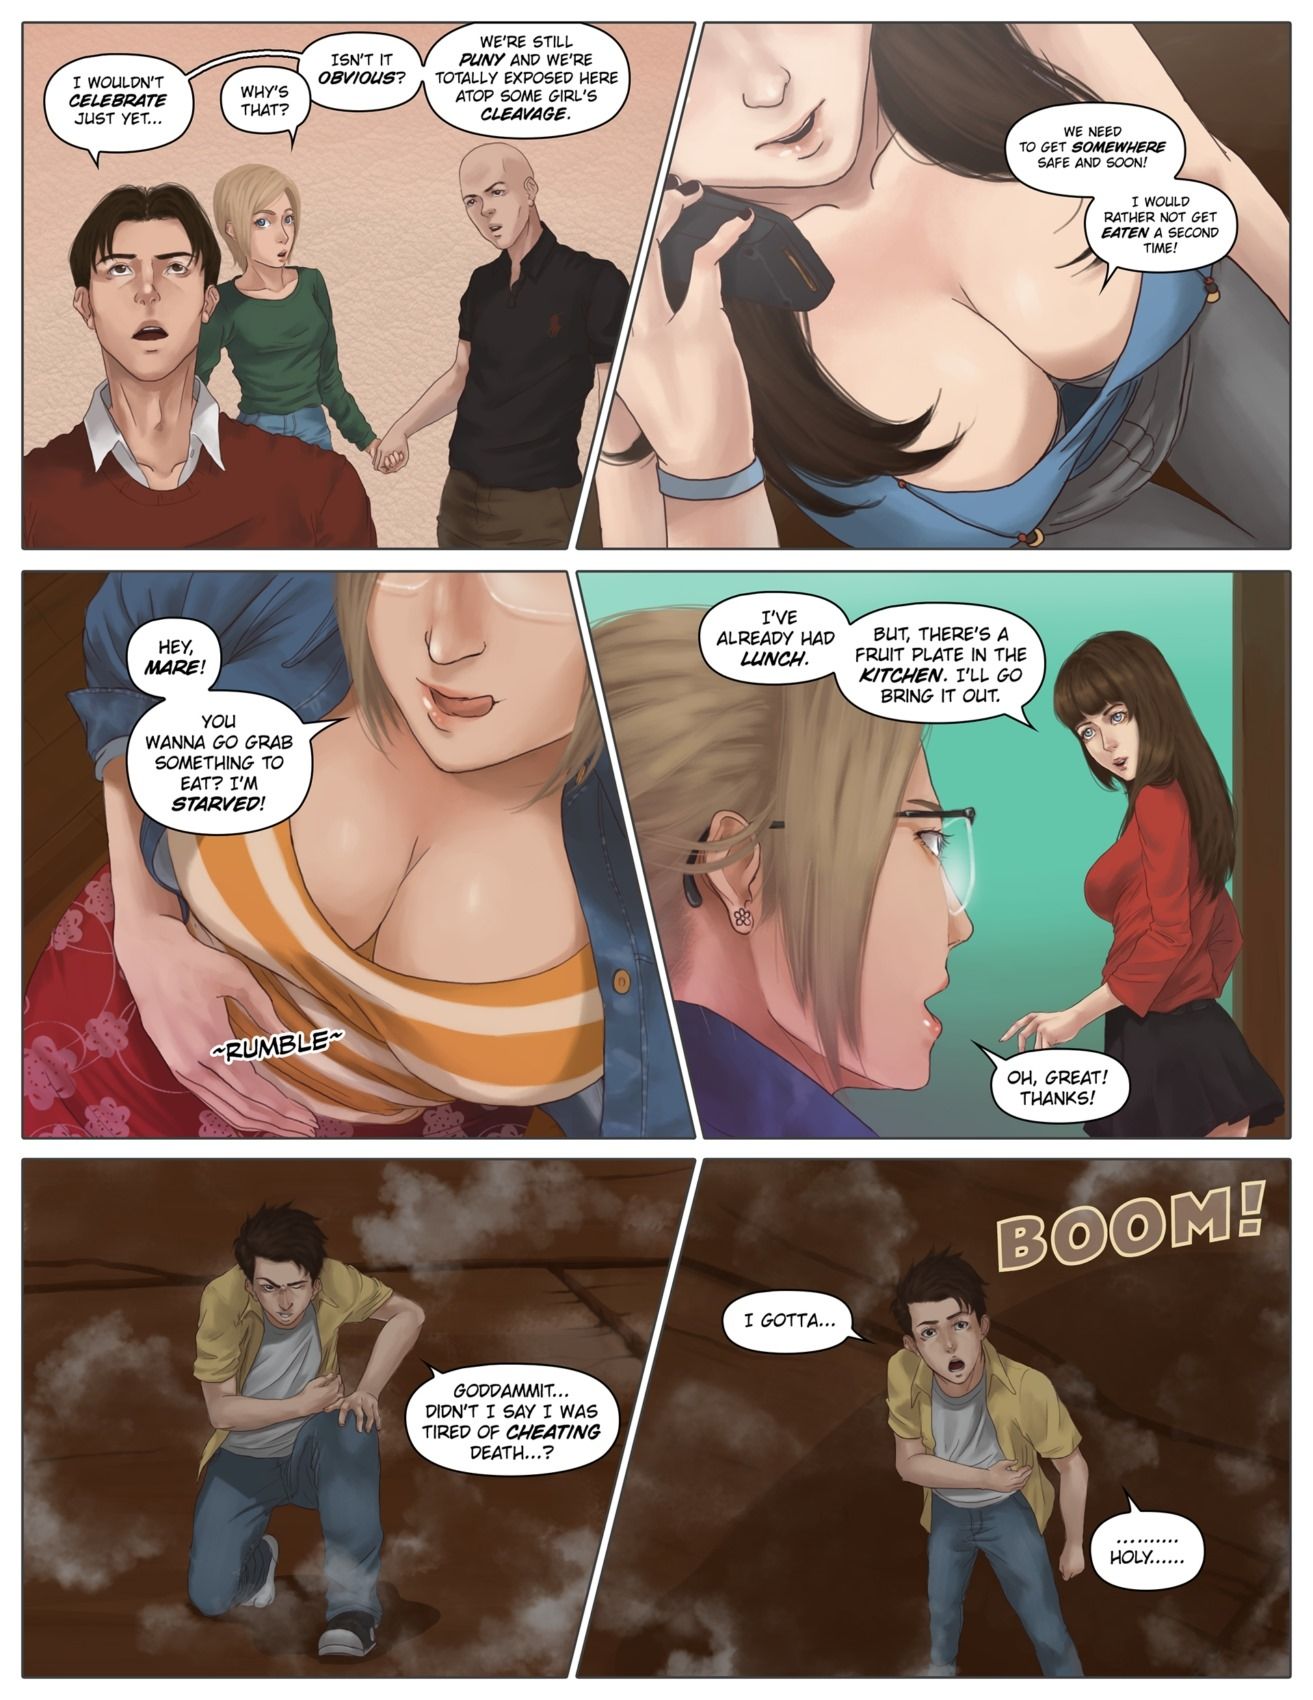 A Weekend Alone Issue 07 by Giantess Fan page 14